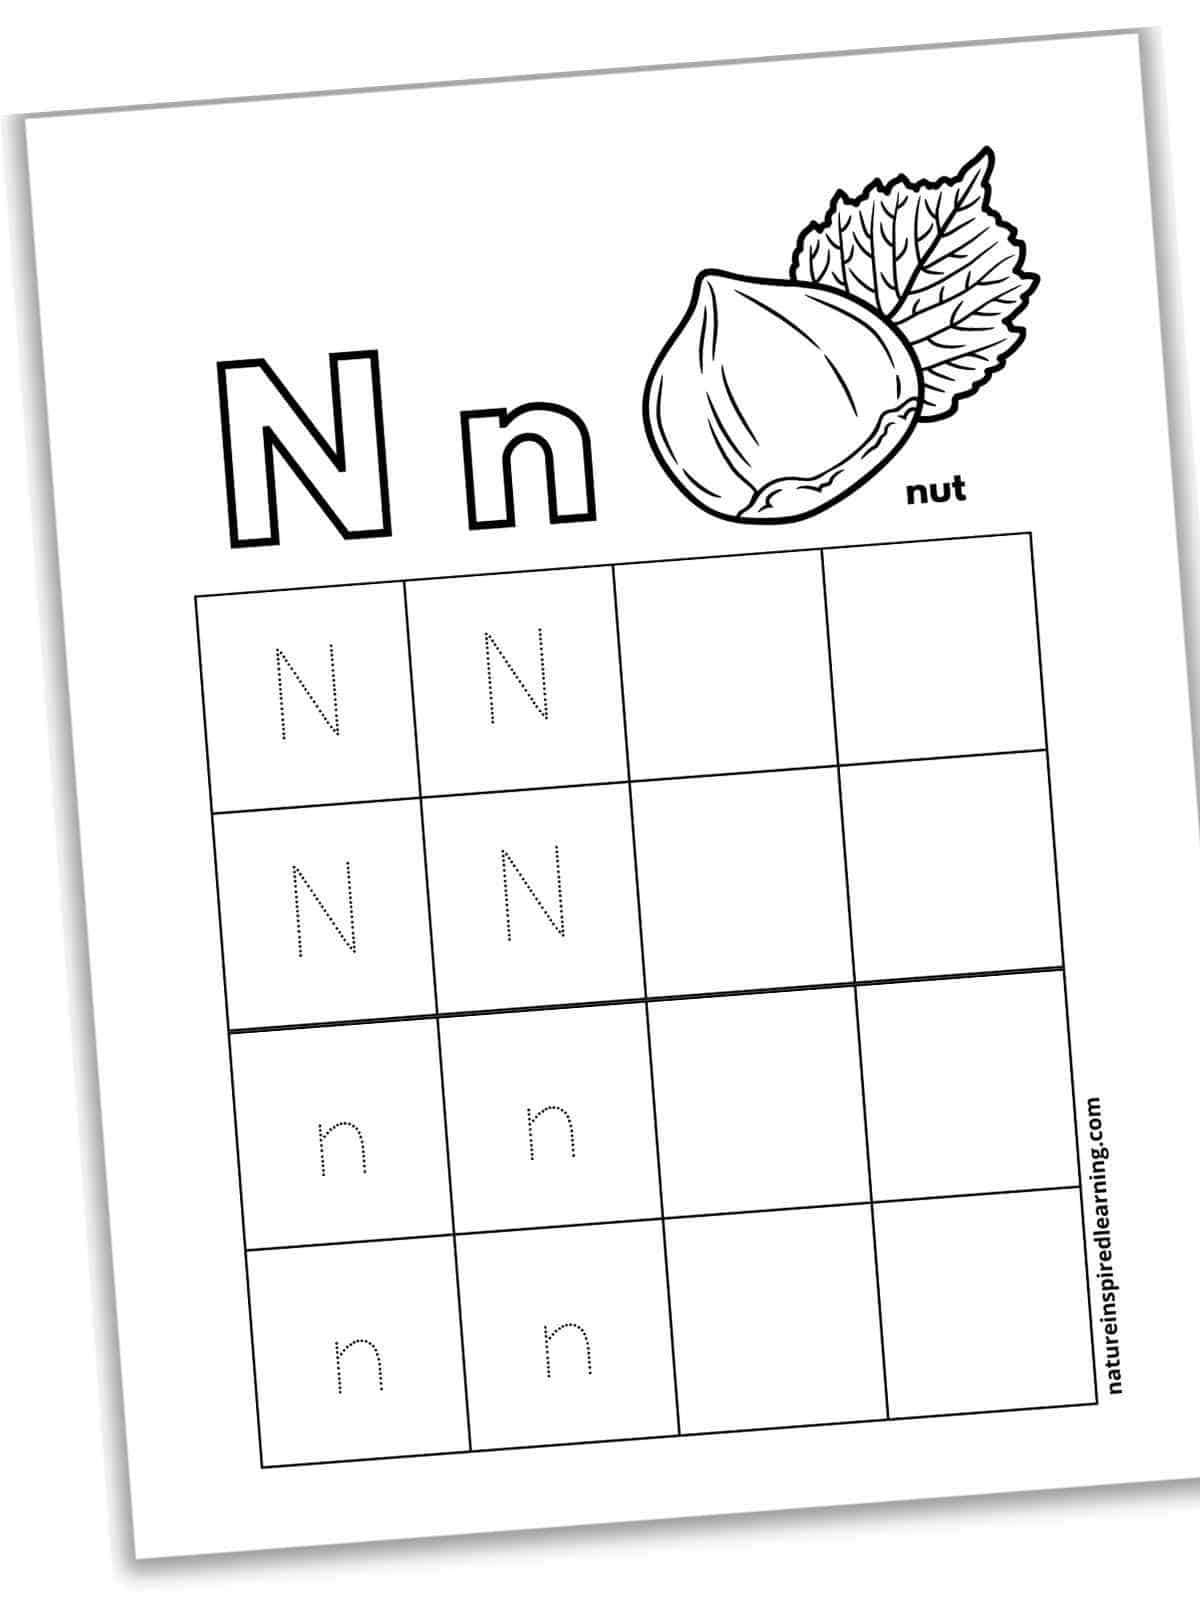 Worksheet with N n in outline form next to a nut with a leaf across the top with square grids below with dotted N's and n's and blank squares